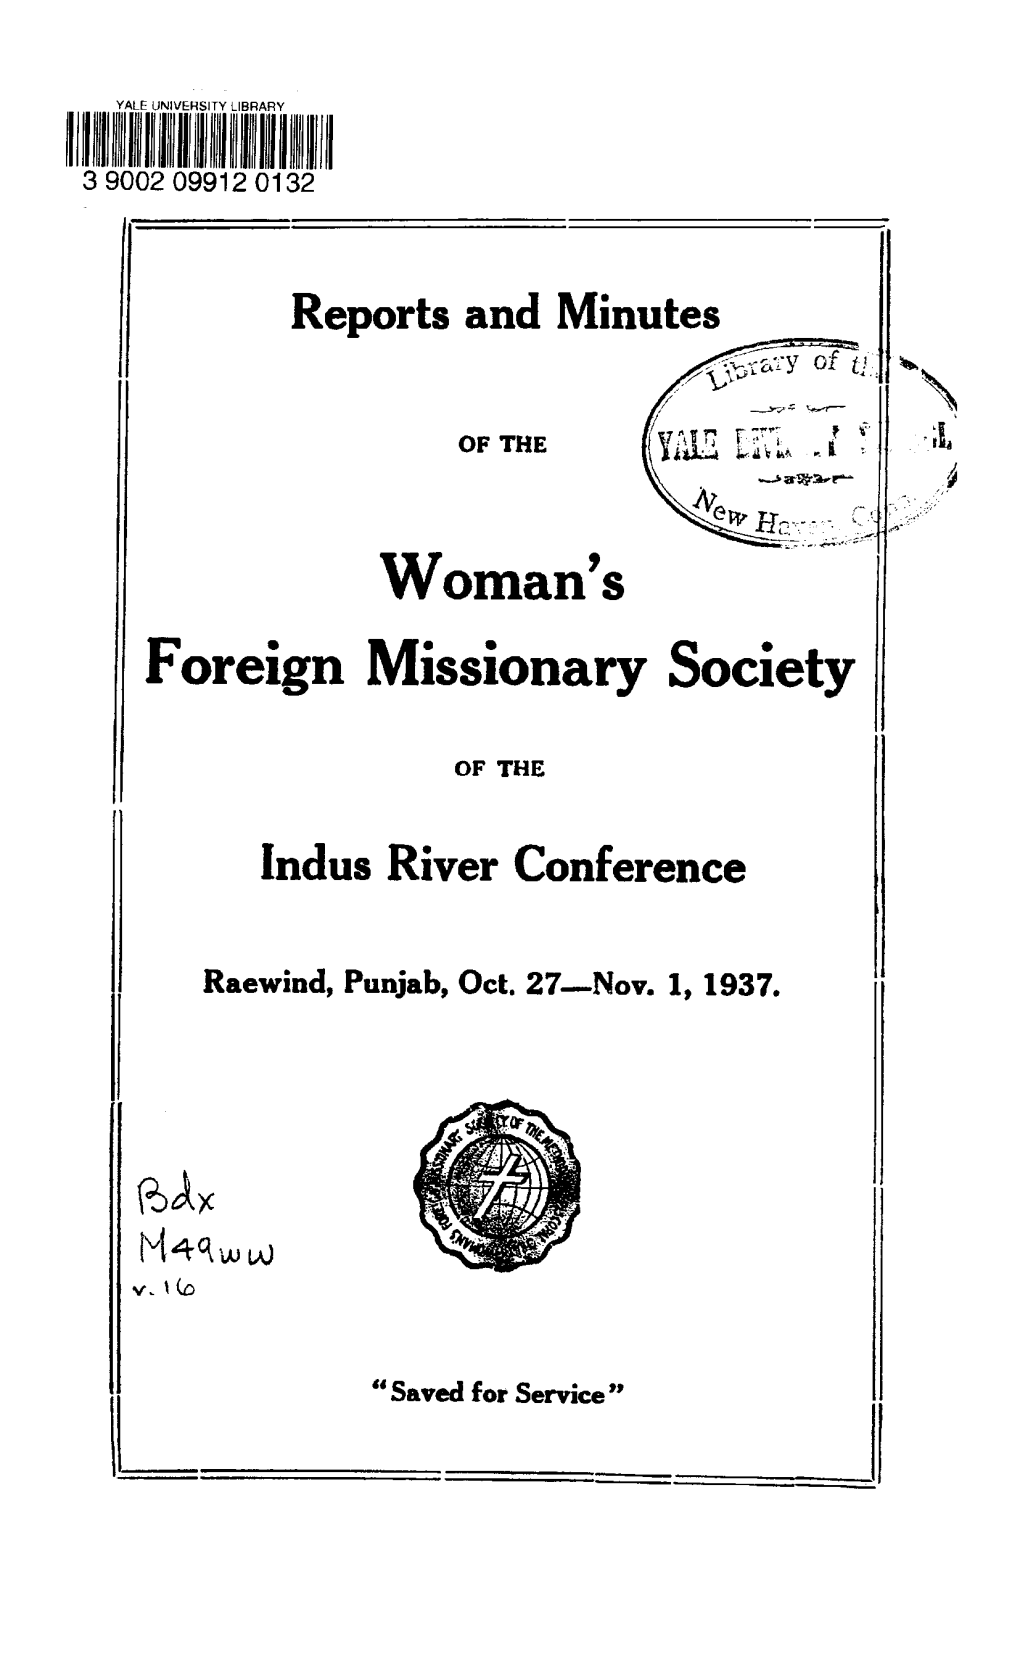 Woman's Foreign Missionary Society." 7